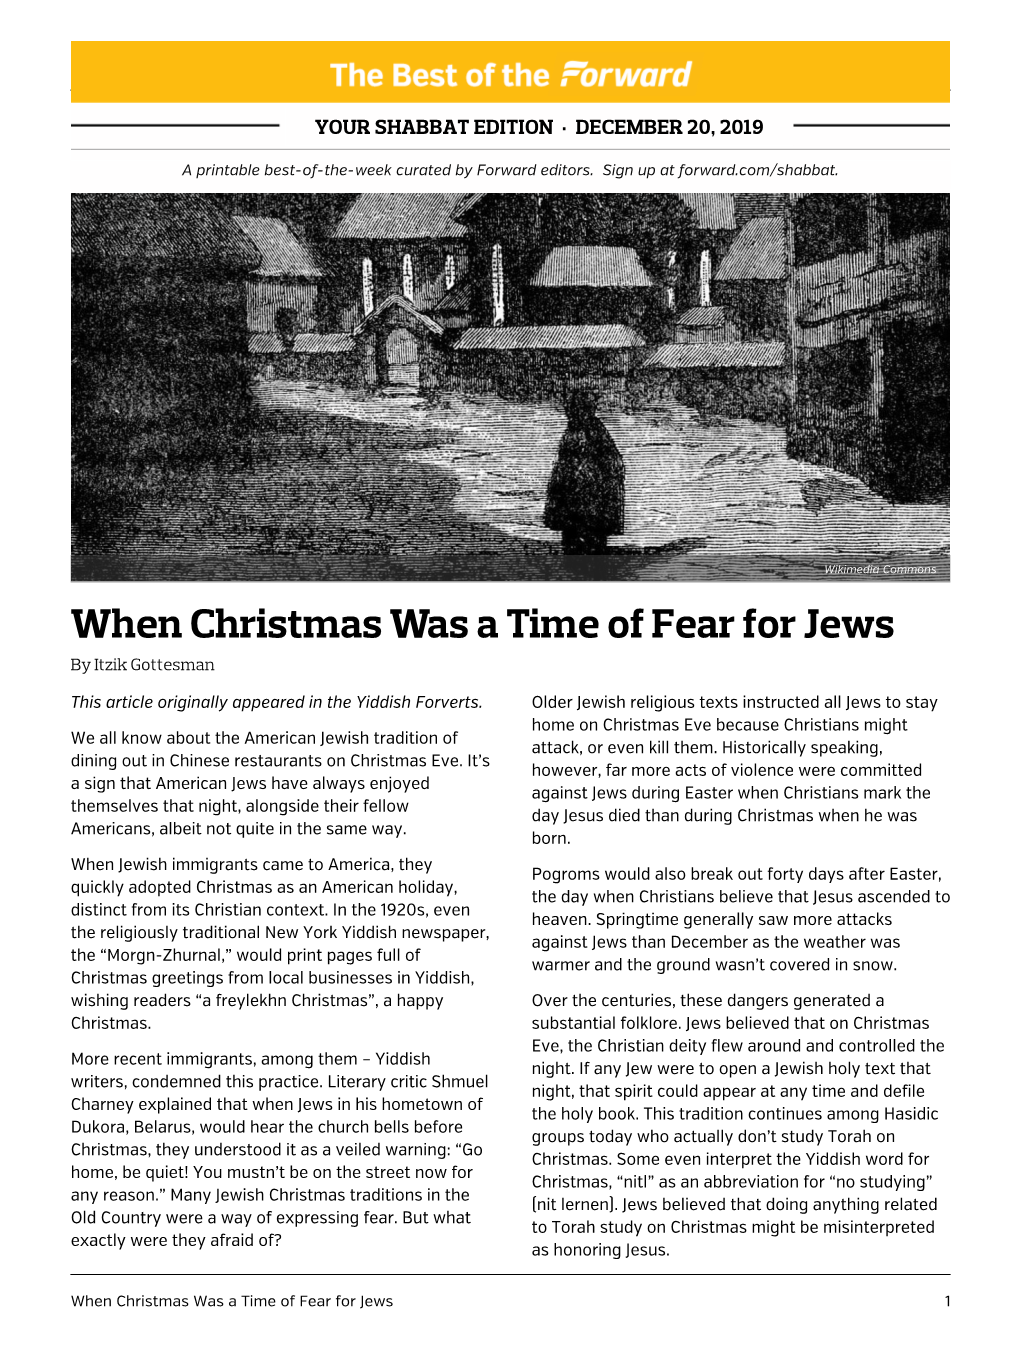 When Christmas Was a Time of Fear for Jews by Itzik Gottesman